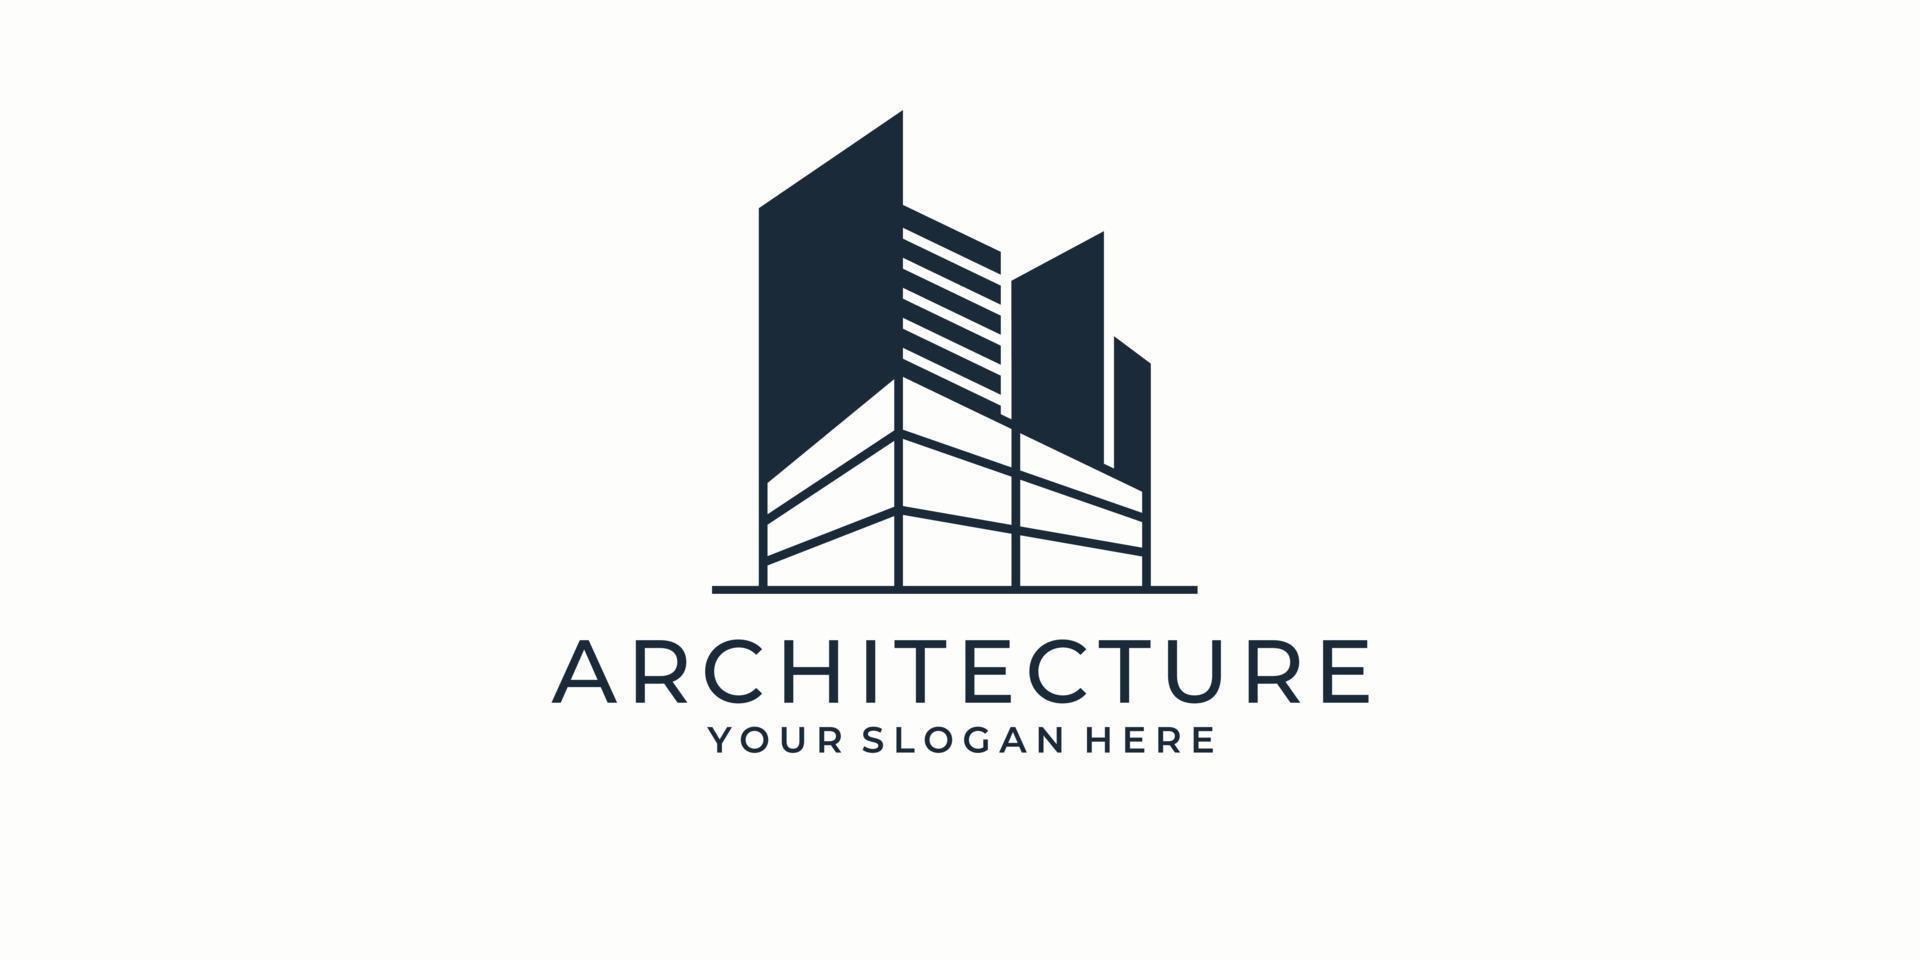 architecture logo design for your company. vector